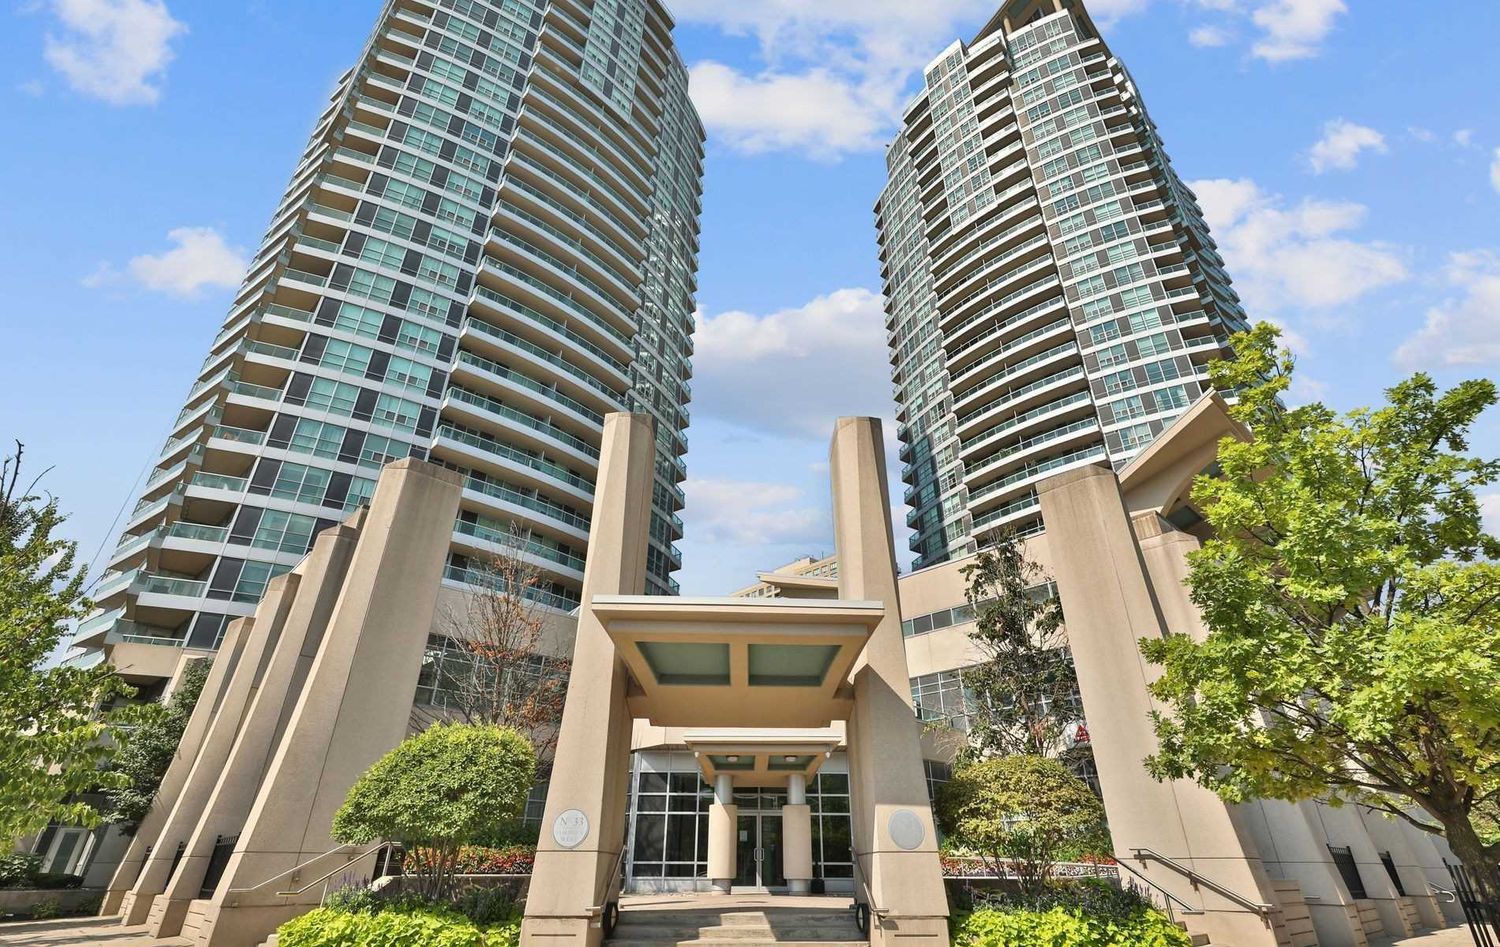 1 Elm Drive W. One City Centre Condos is located in  Mississauga, Toronto - image #2 of 2